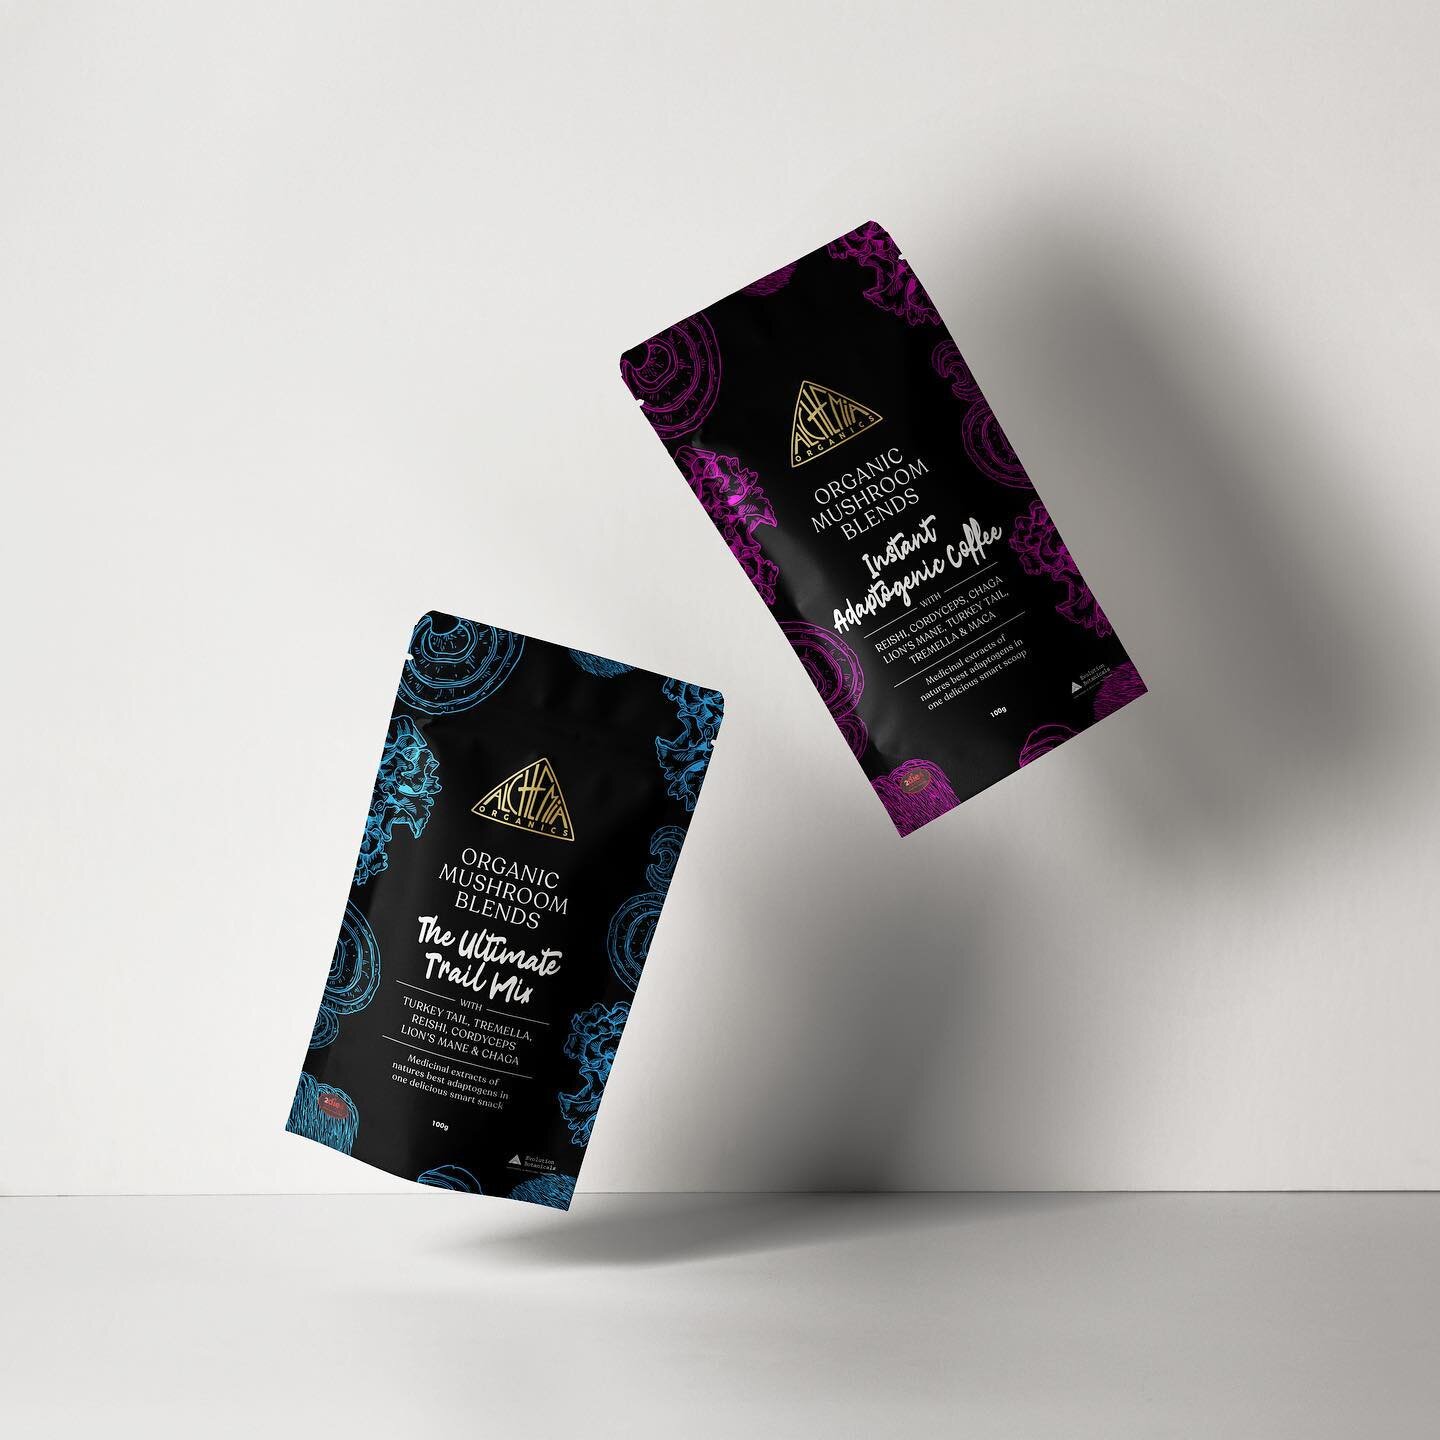 @2die4livefoods approached us for a new packaging suite for their functional organic mushroom blends, Alchemia Organics. The collection combines premium organic ingredients with nature&rsquo;s best adaptogens to allow people to easily include these p